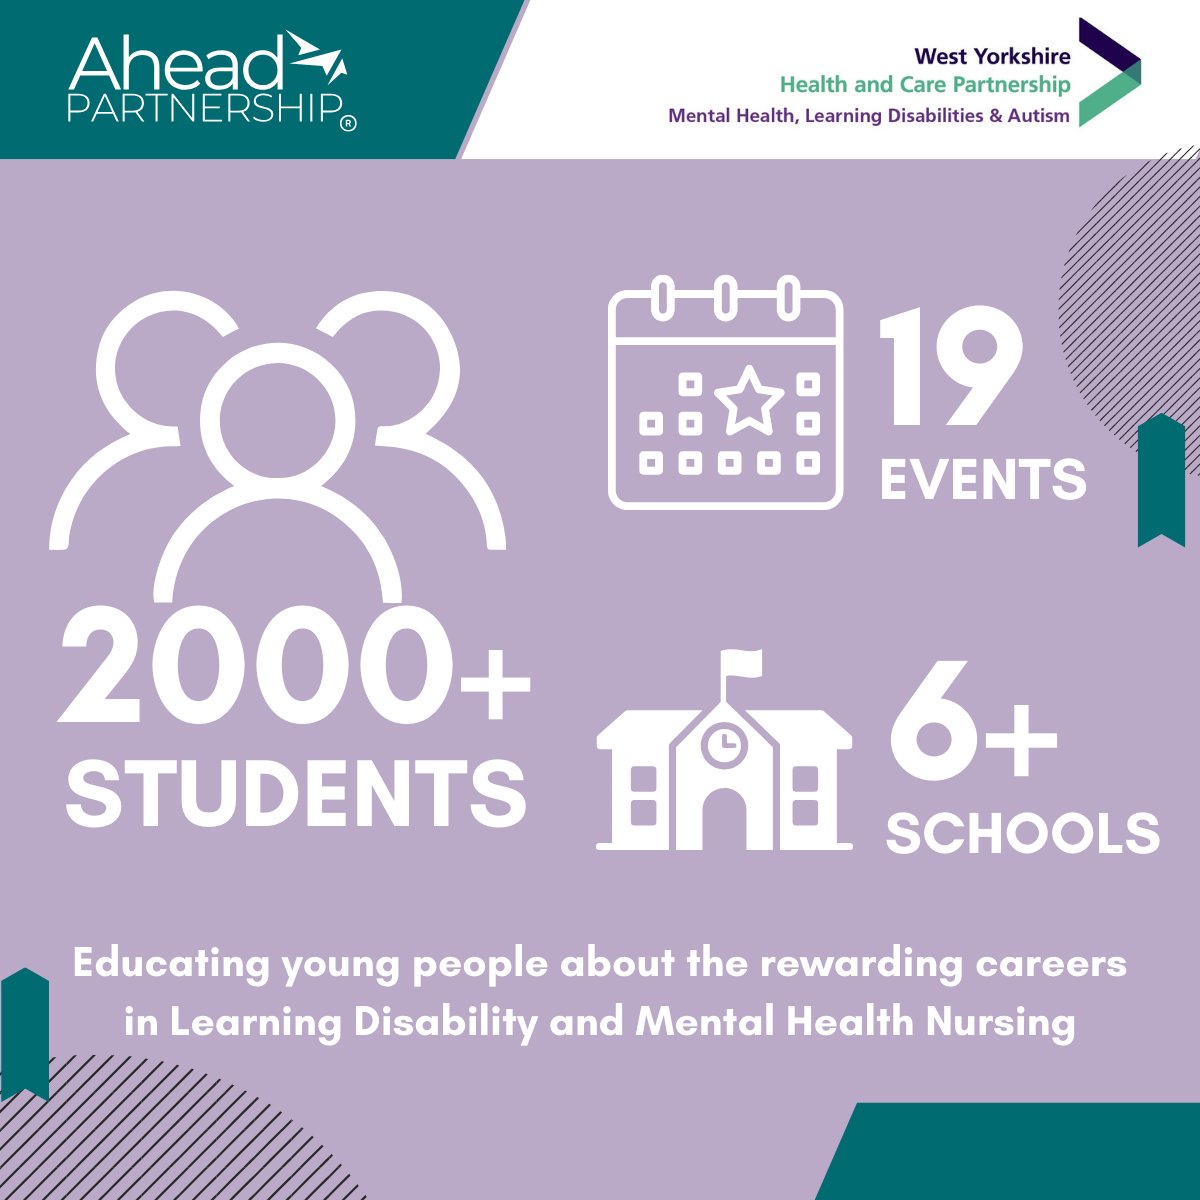 @WYpartnership Learning Disability & Mental Health #Careers Programme is in delivery phase with 5 activities already taking place. The programme has reached 300+ students so far and forecast to reach 2,000+ young people by the end of the programme! #NursingCareers #SocialValue